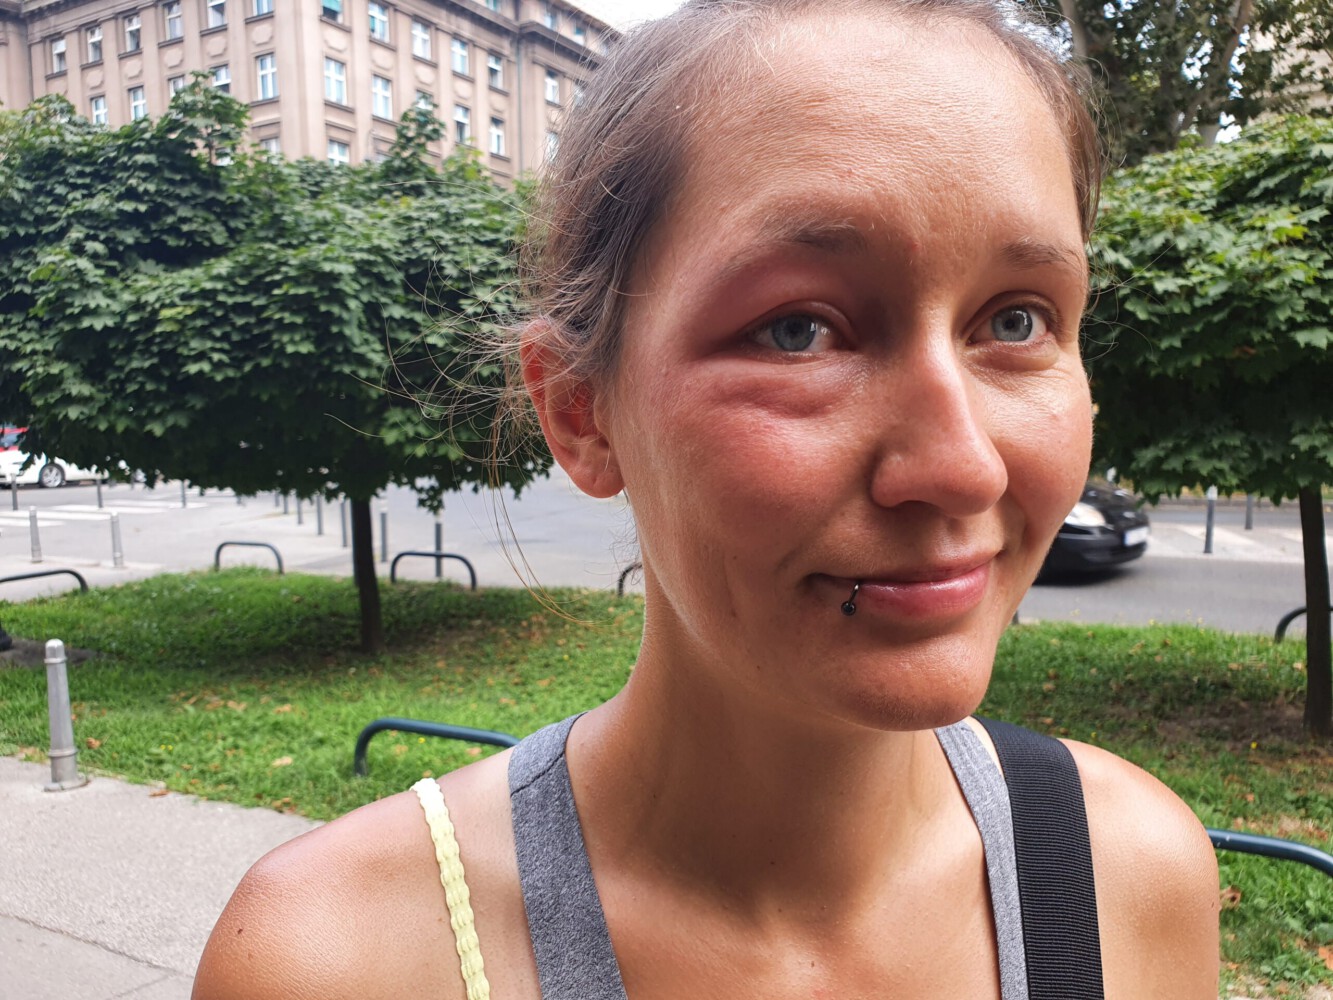 Alina with her swollen eye after the attack of an insect.